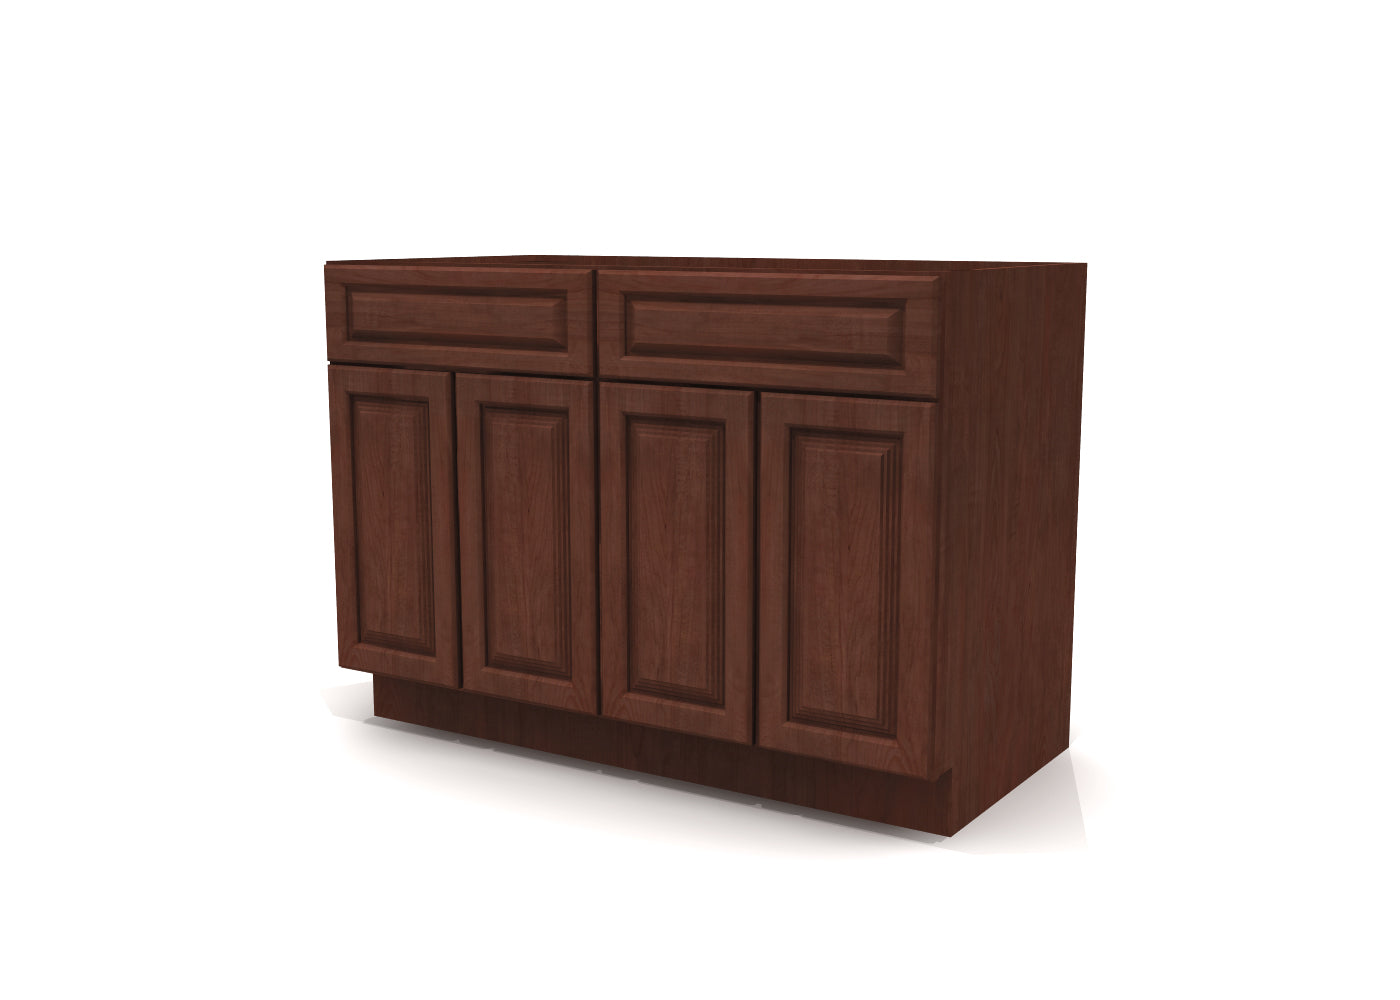 Base Four Door Two Drawers 48" Wide Cherry Raised Panel Cabinet